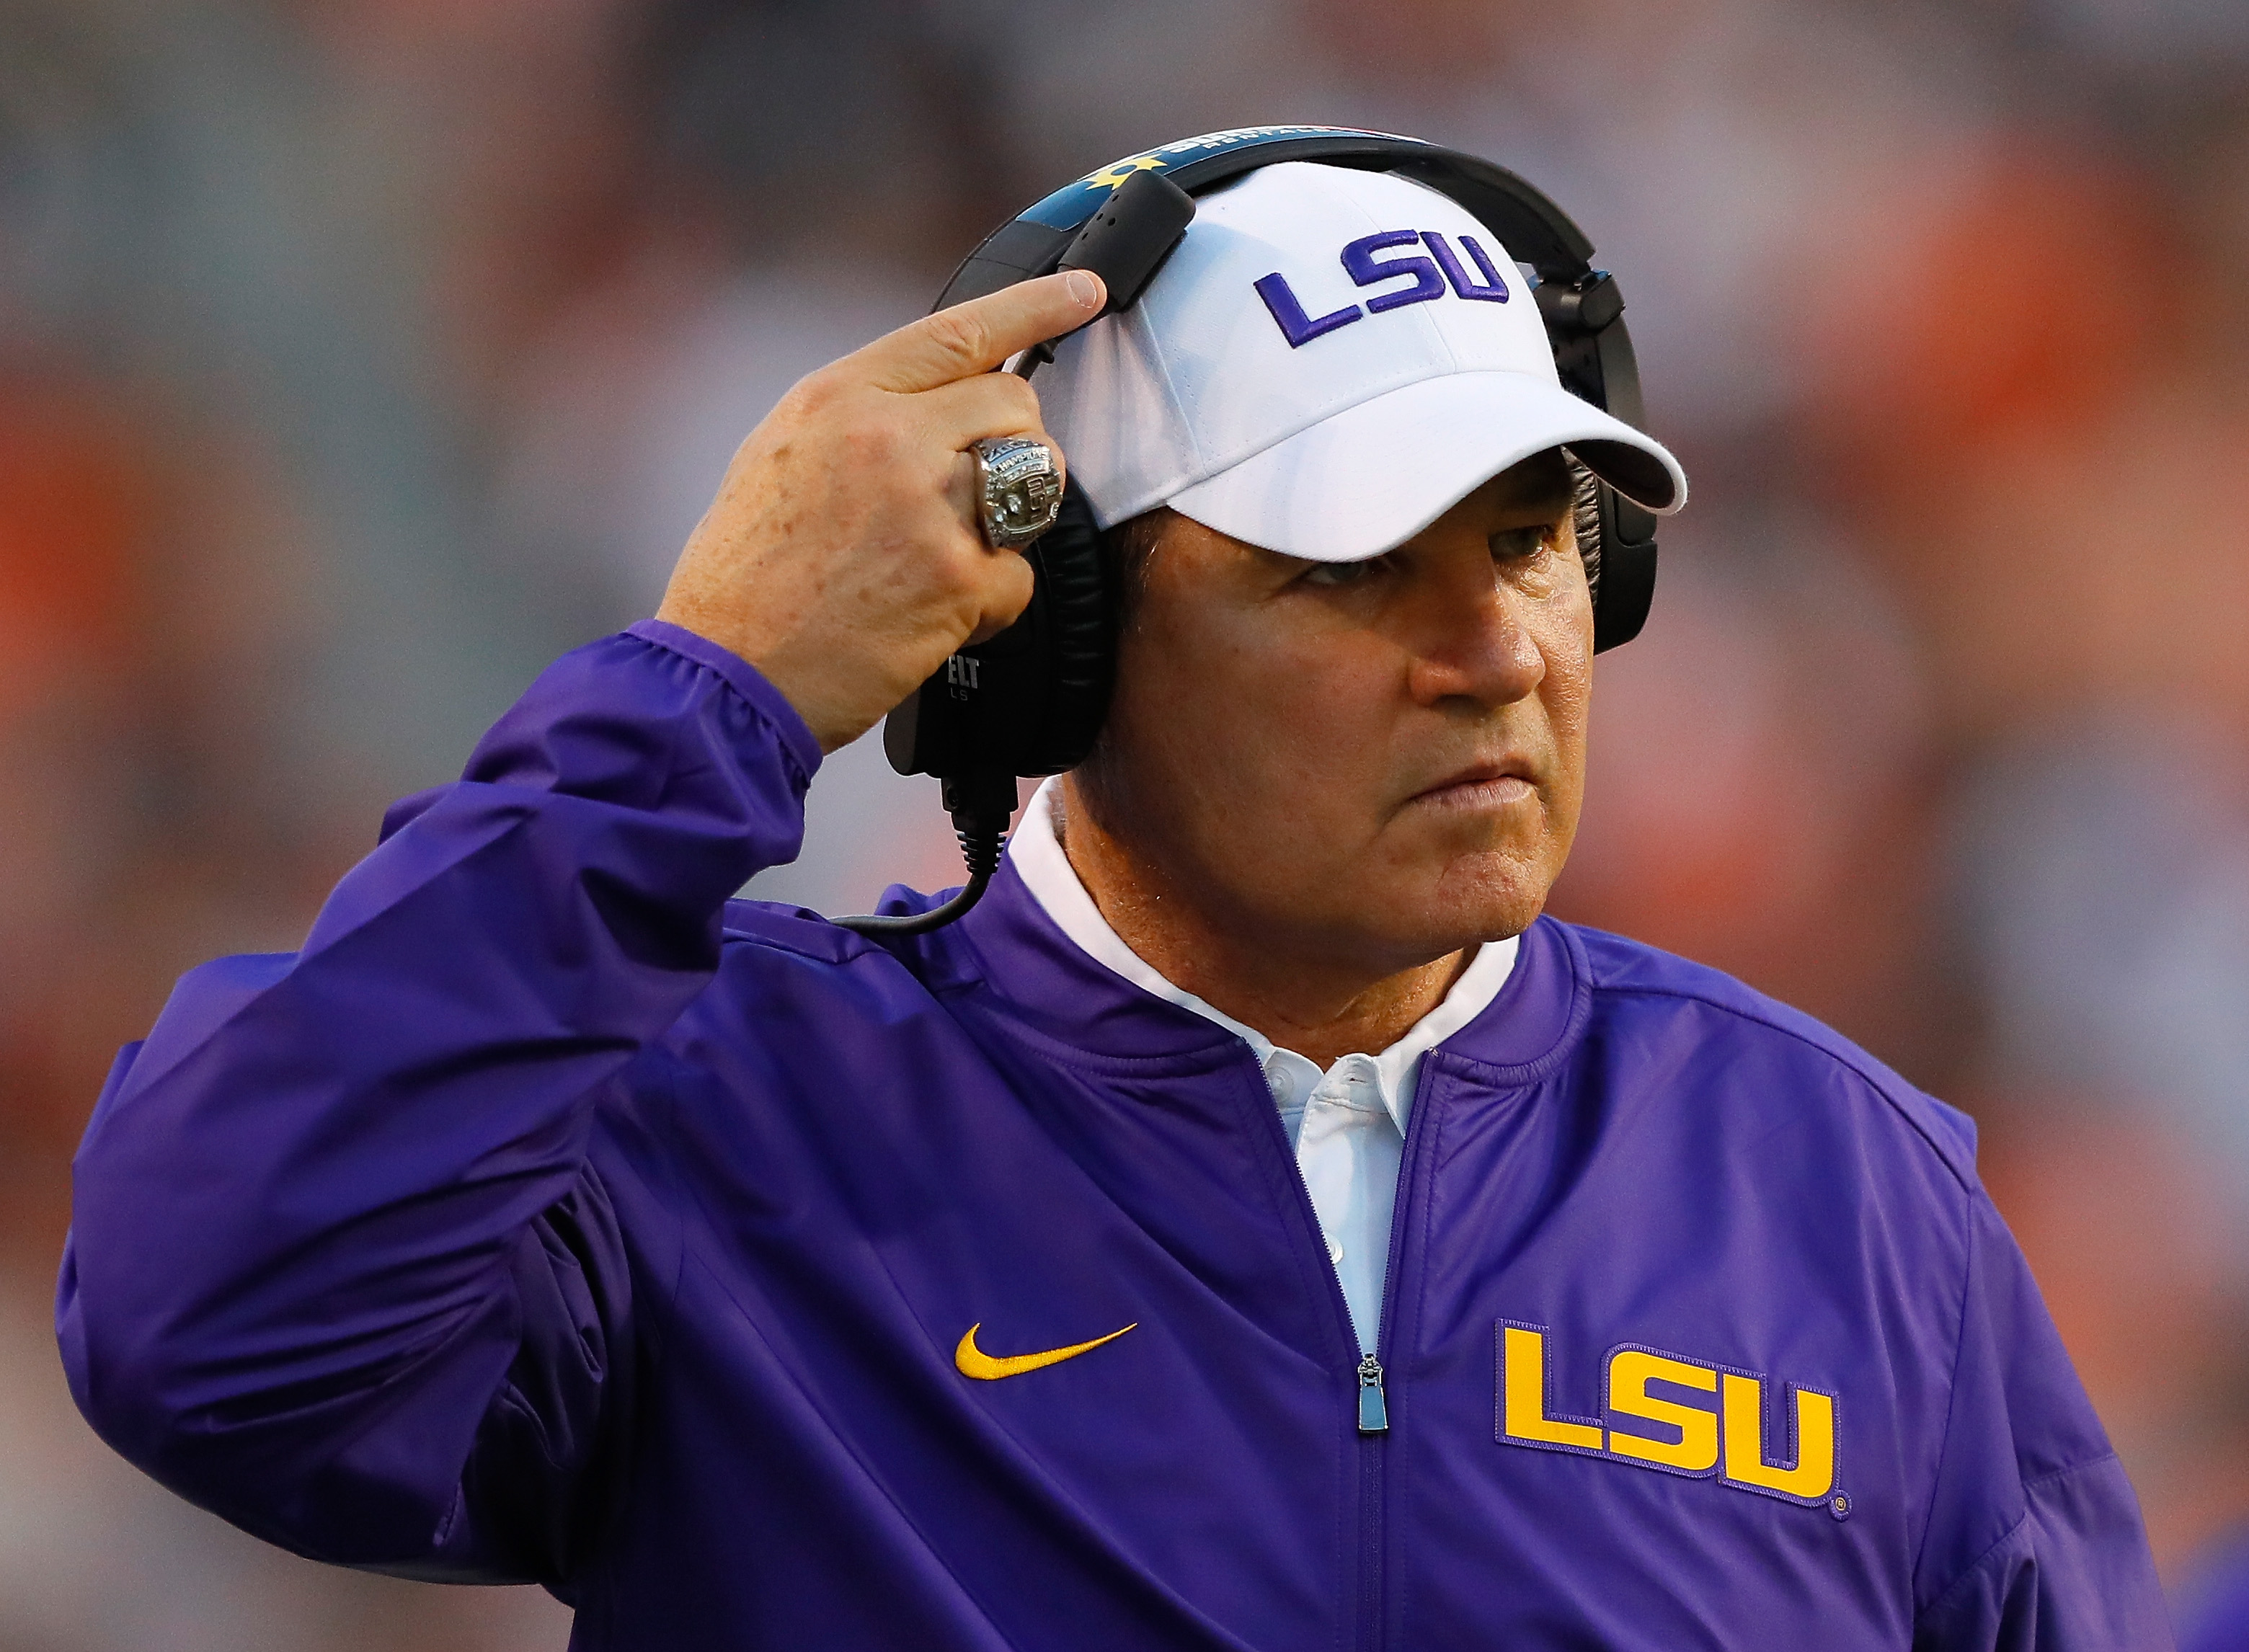 LSU Ignored Advice to Fire Football Coach Amid Sexual Misconduct Complaints, Report Reveals